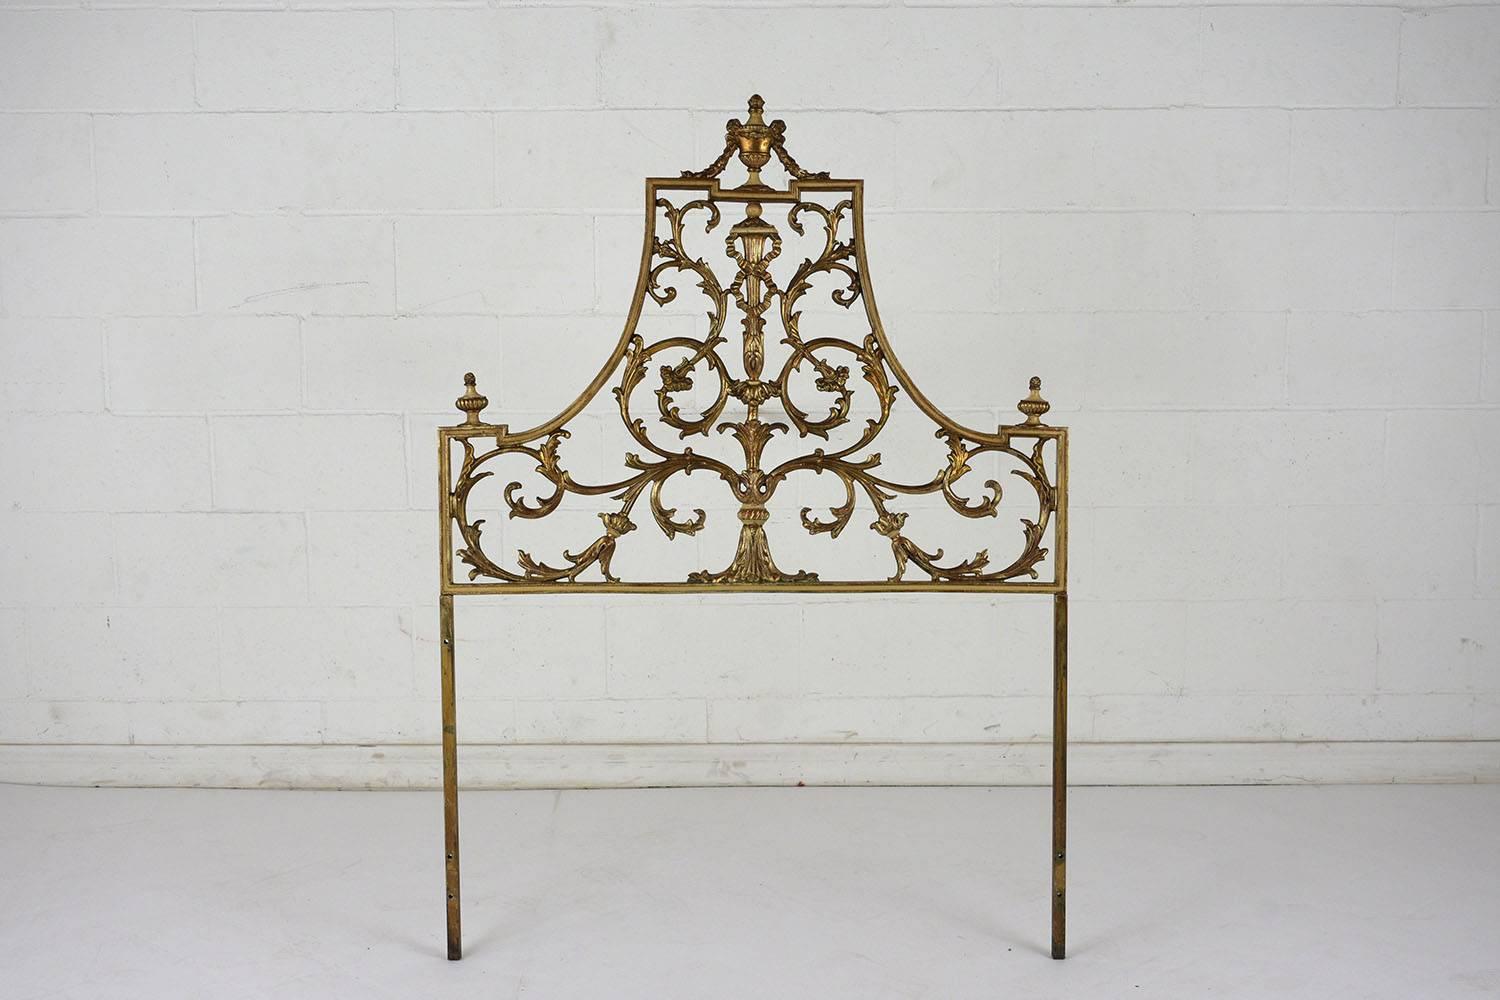 This pair of 1950s Regency style twin headboards are made of metal finished in an eye-catching gold color. The canopy shape of the headboards is accented by scrolling acanthus leaves and an elongated urn in the centre. The top and corners have